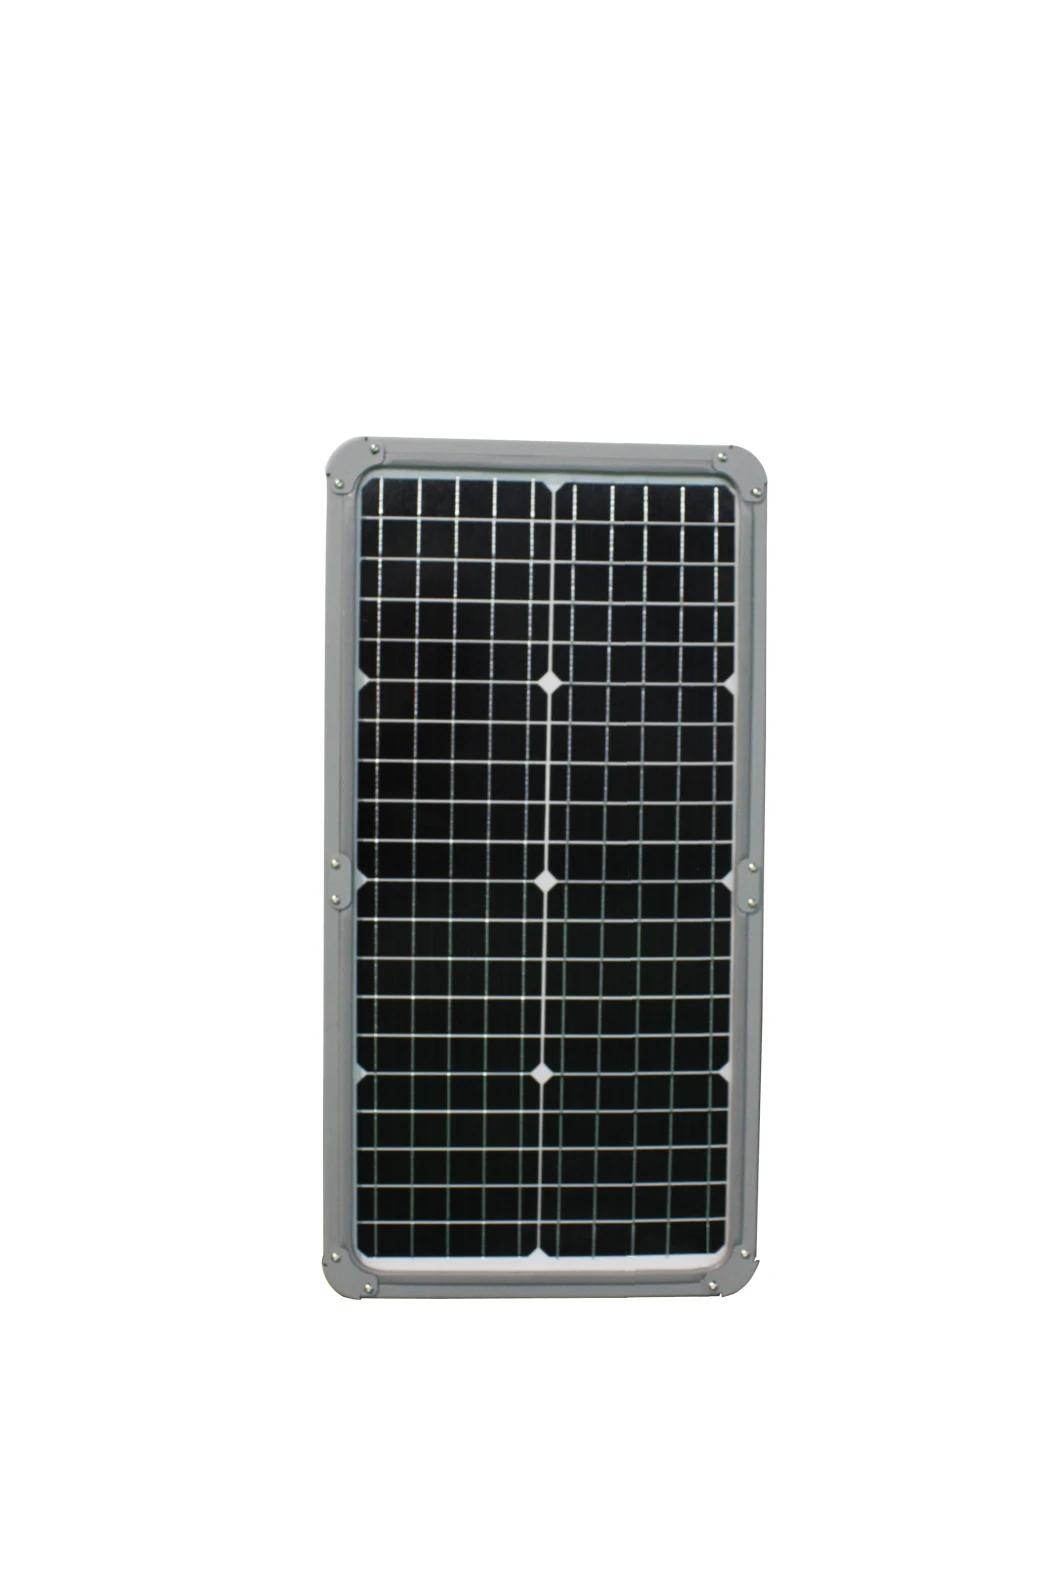 China High Quality Integrated Outdoor LED Solar Garden Light 50W